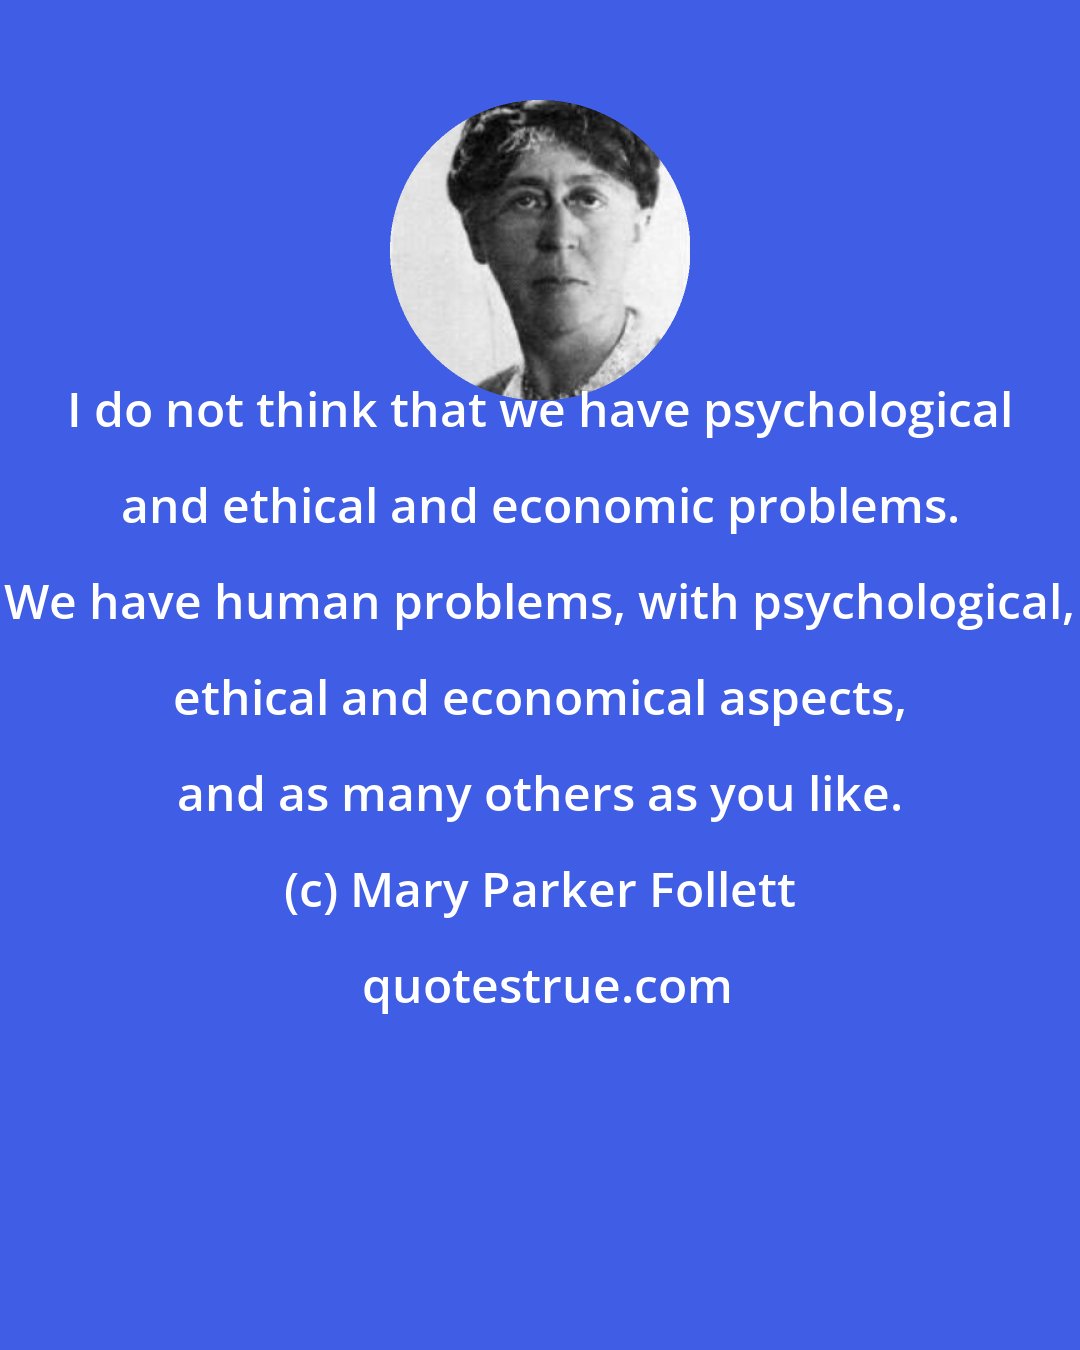 Mary Parker Follett: I do not think that we have psychological and ethical and economic problems. We have human problems, with psychological, ethical and economical aspects, and as many others as you like.